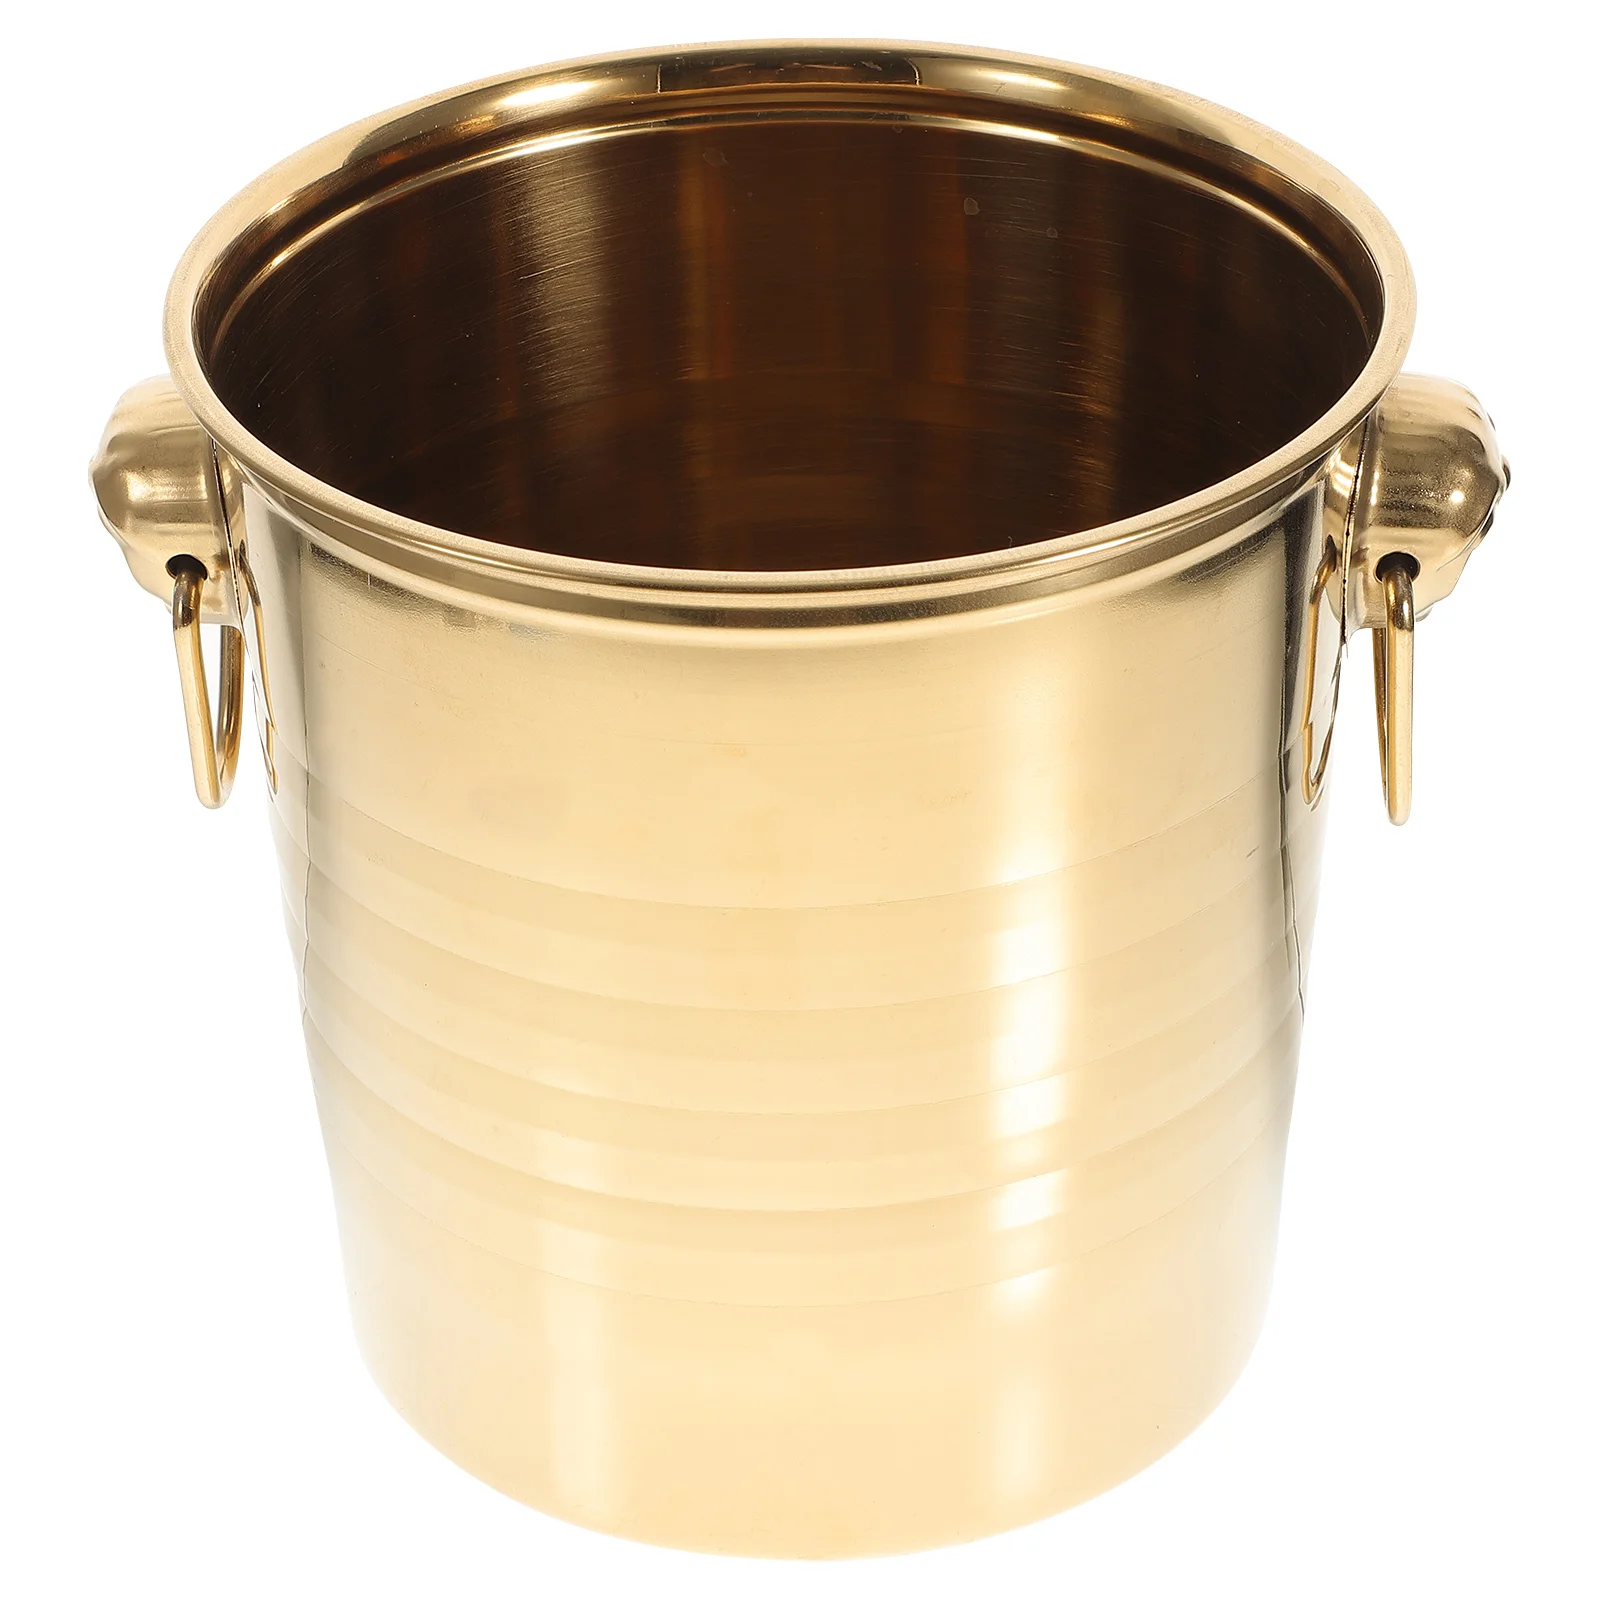 

Stainless Steel Bucket Insulated Bucket Cooler Beverage Tub With Handle Bucket Beer Bottles Tub for Cocktail Bar